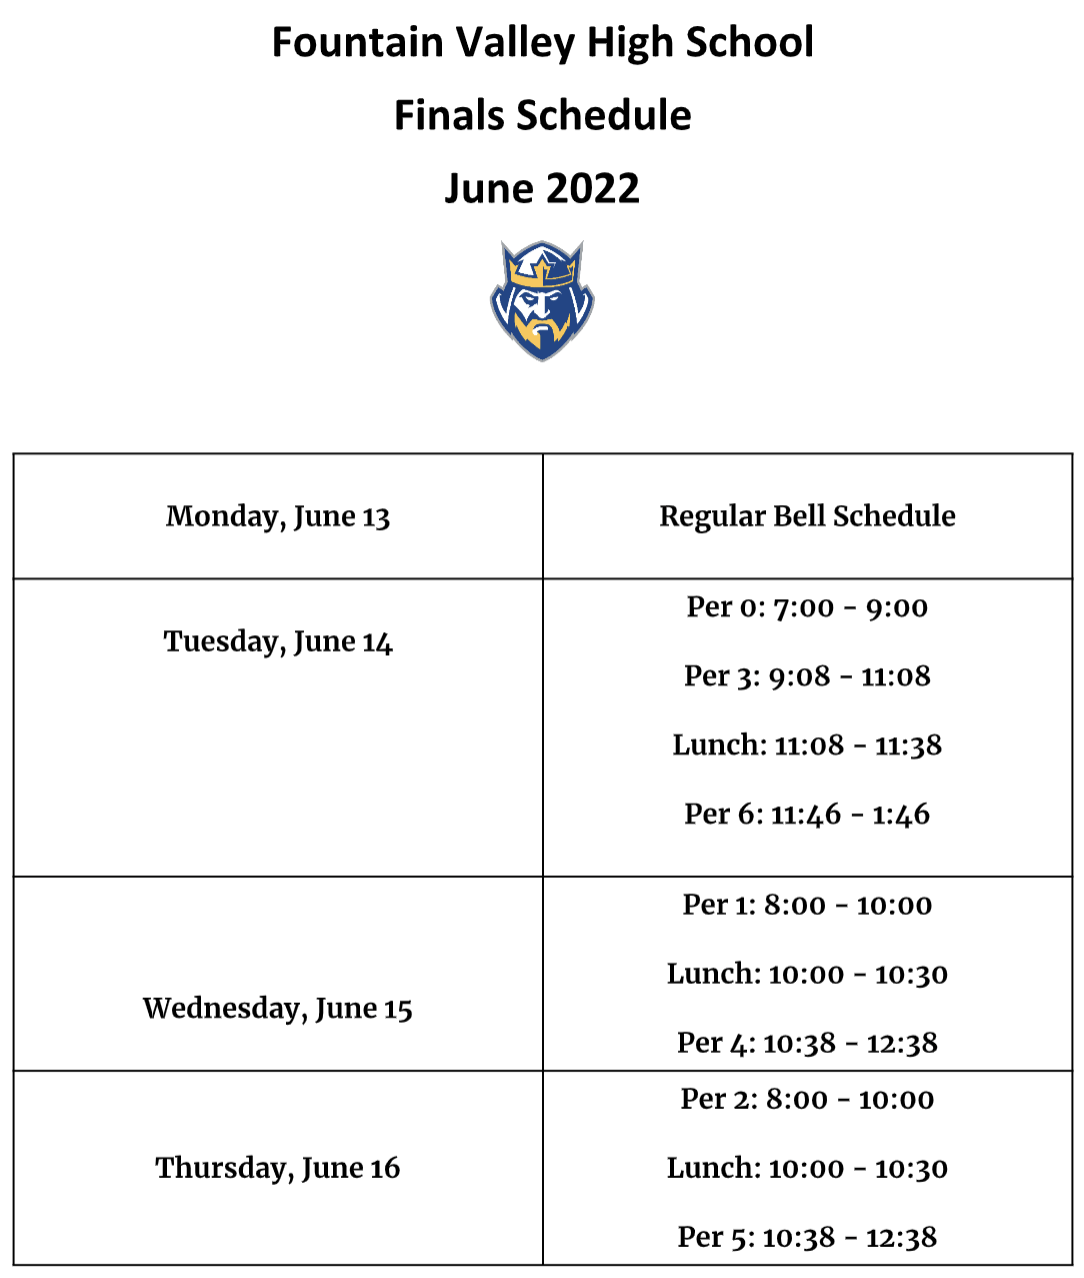 Finals from June 14th through June 16th